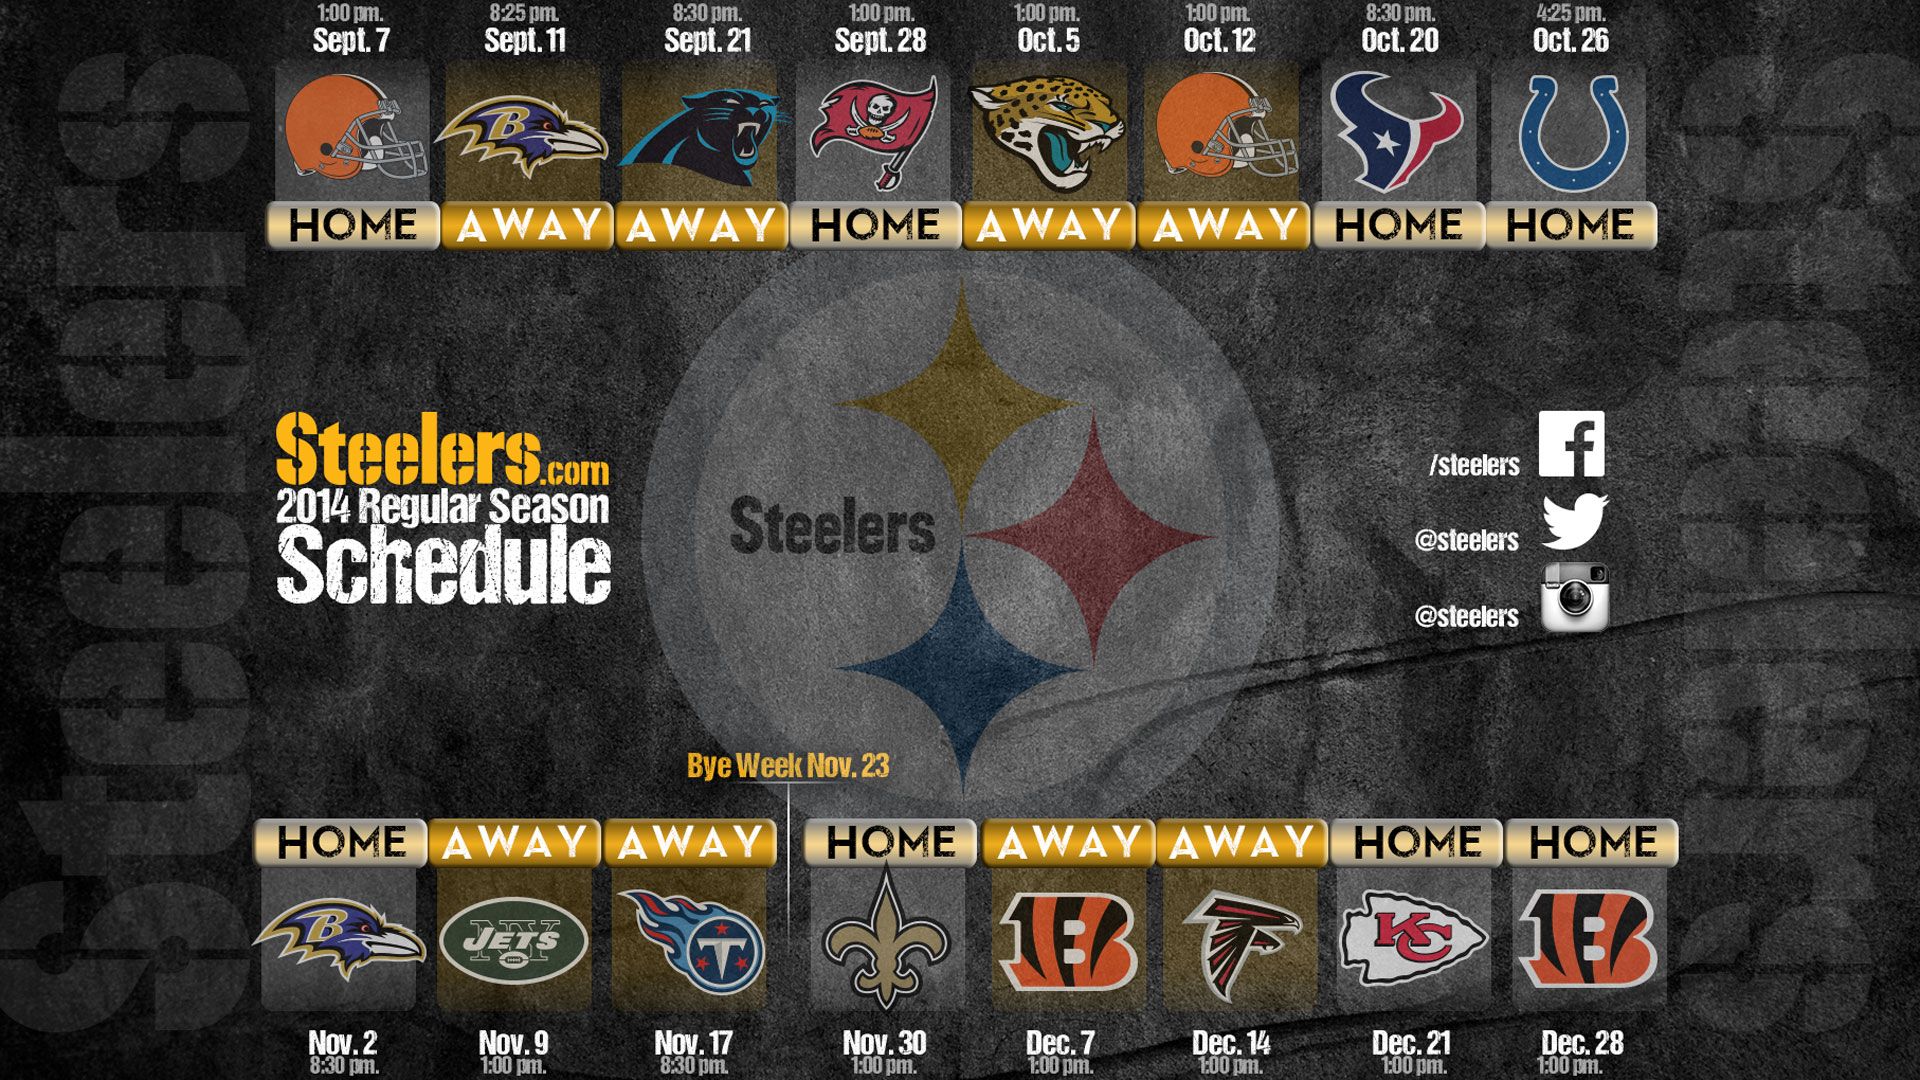 Get the Steelers Schedule on all your devices